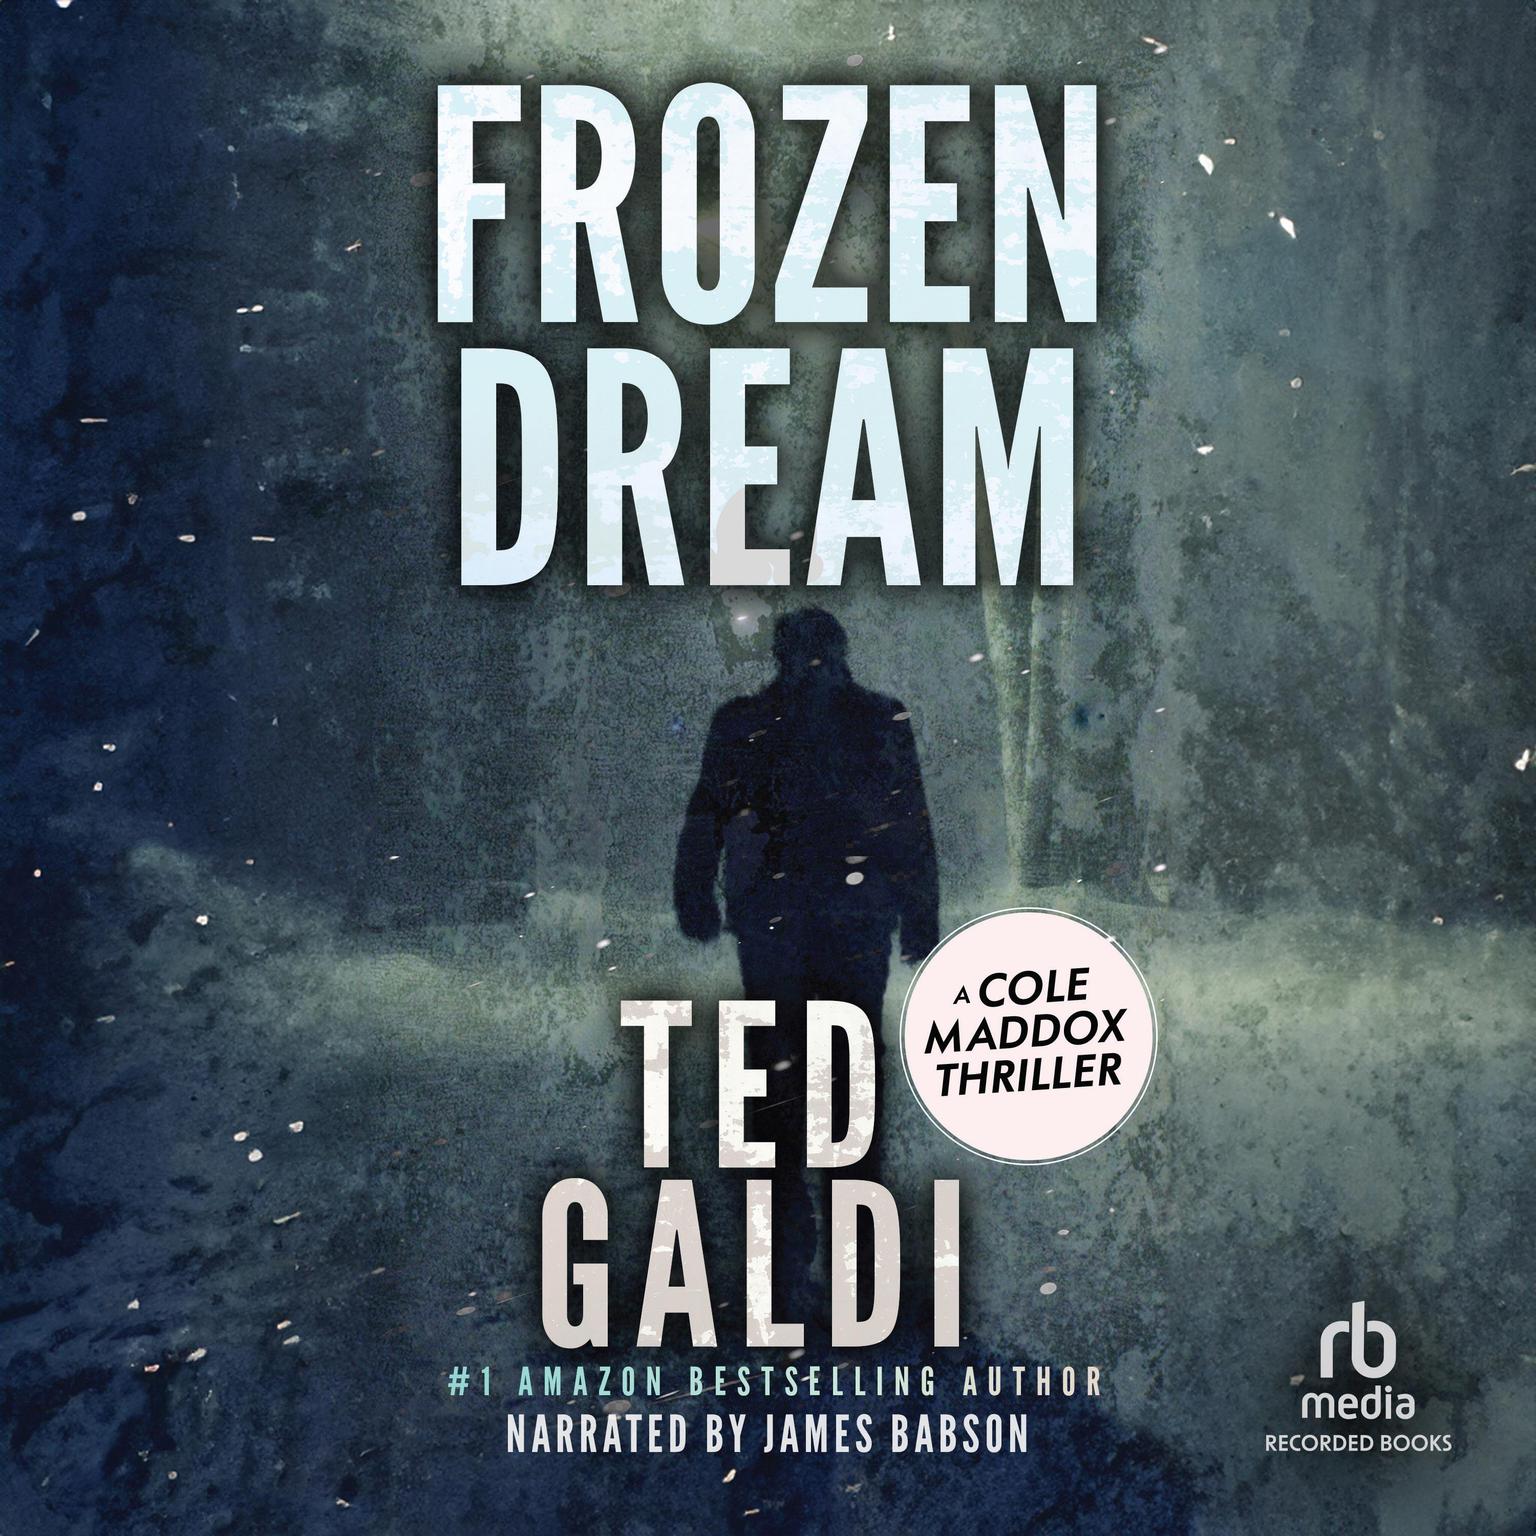 Frozen Dream Audiobook, by Ted Galdi